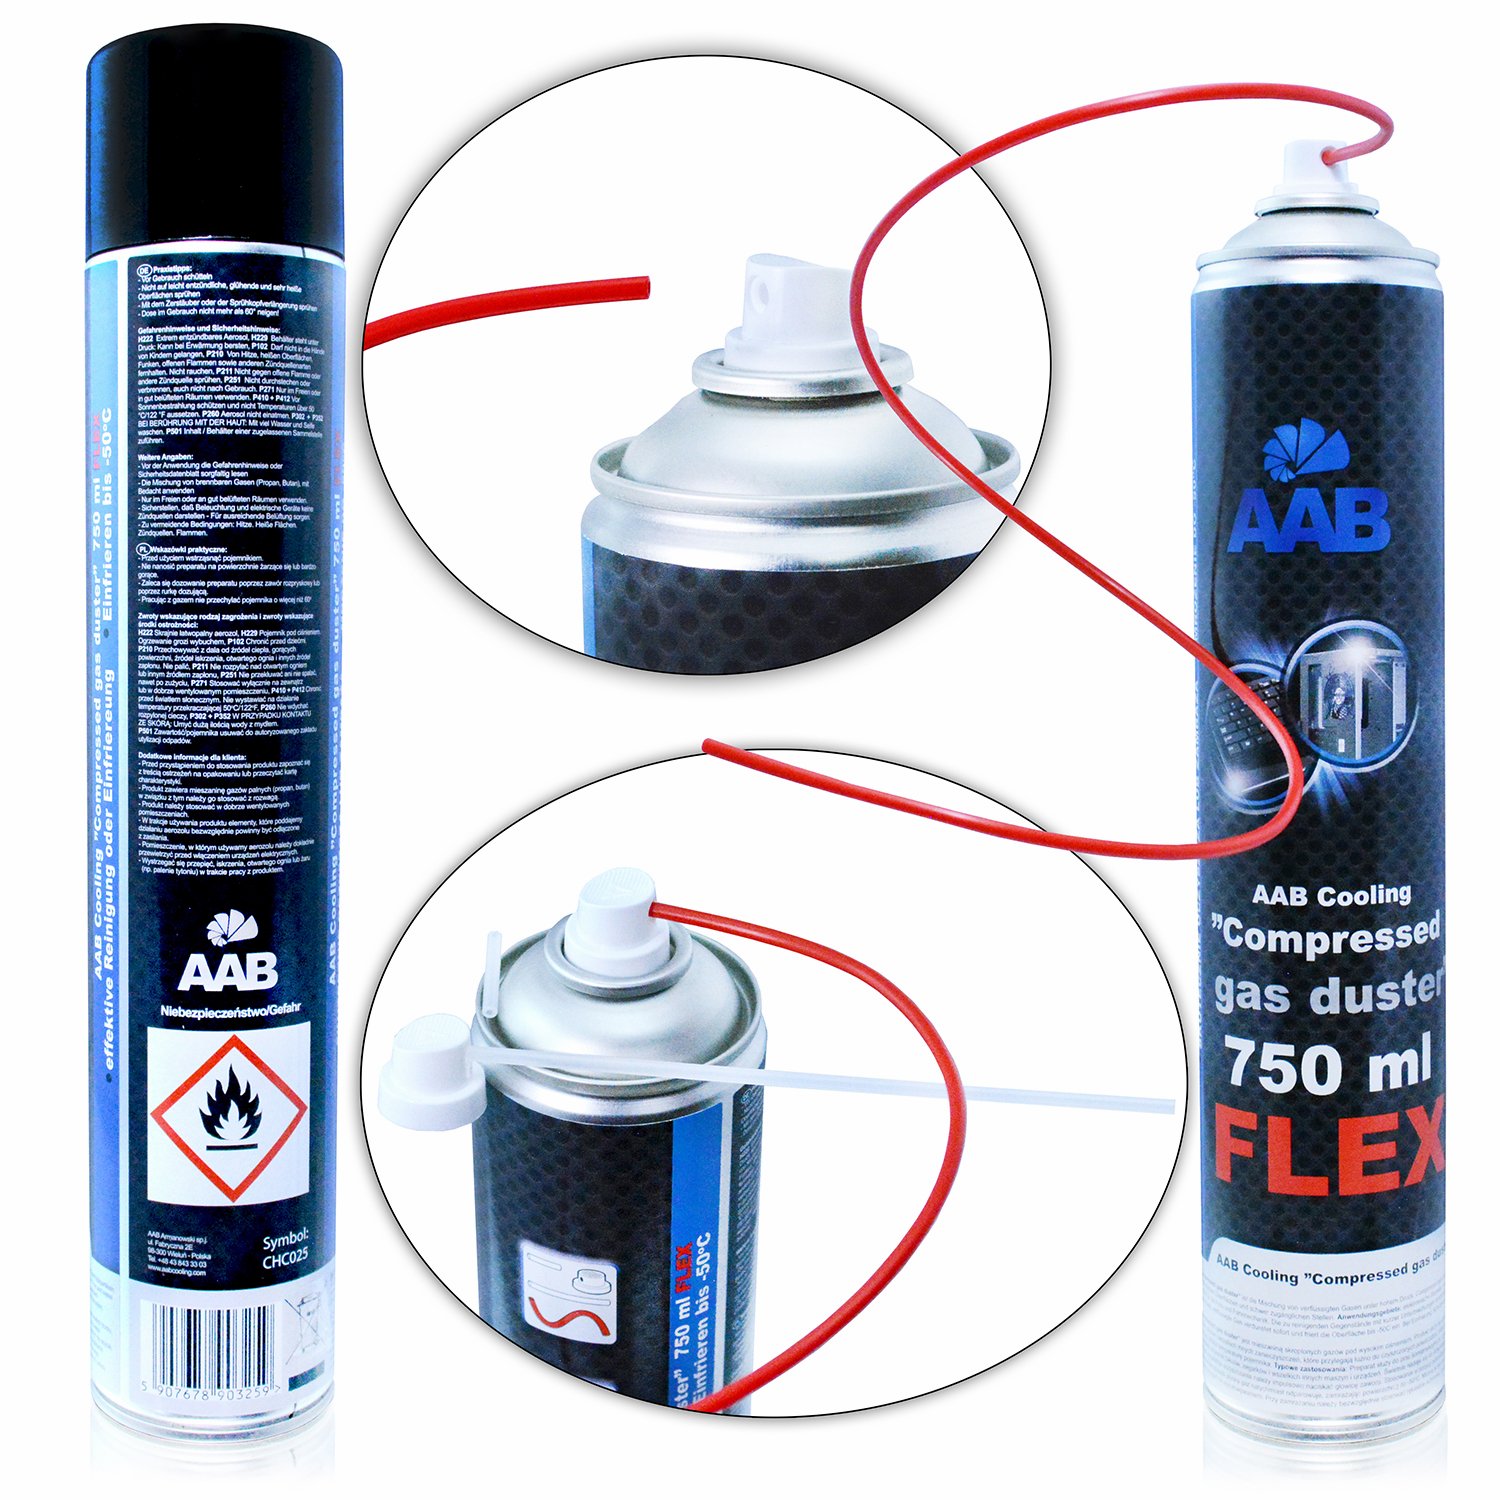 aabcooling_compressed_gas_duster_flex_750ml_dsc_6767